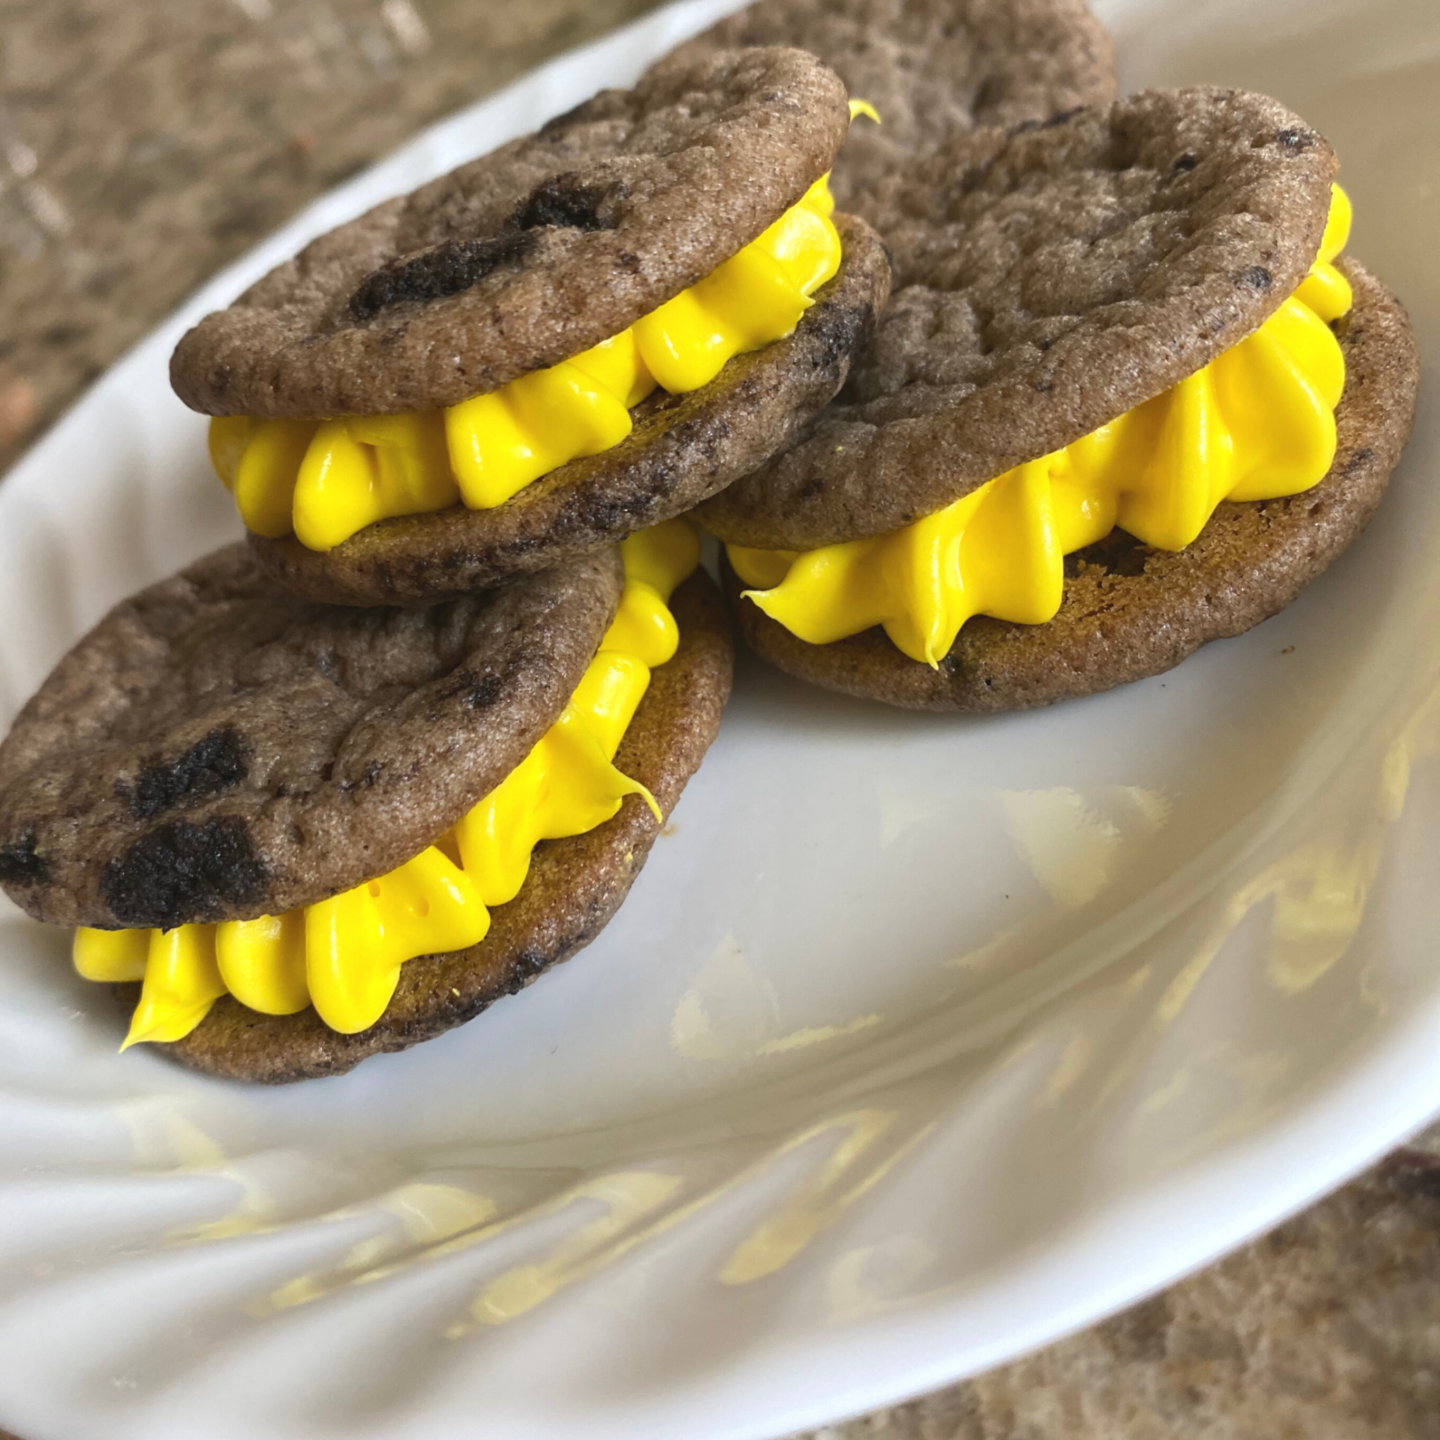 Oreo sugar cookie sandwiches with swirl yellow frosting